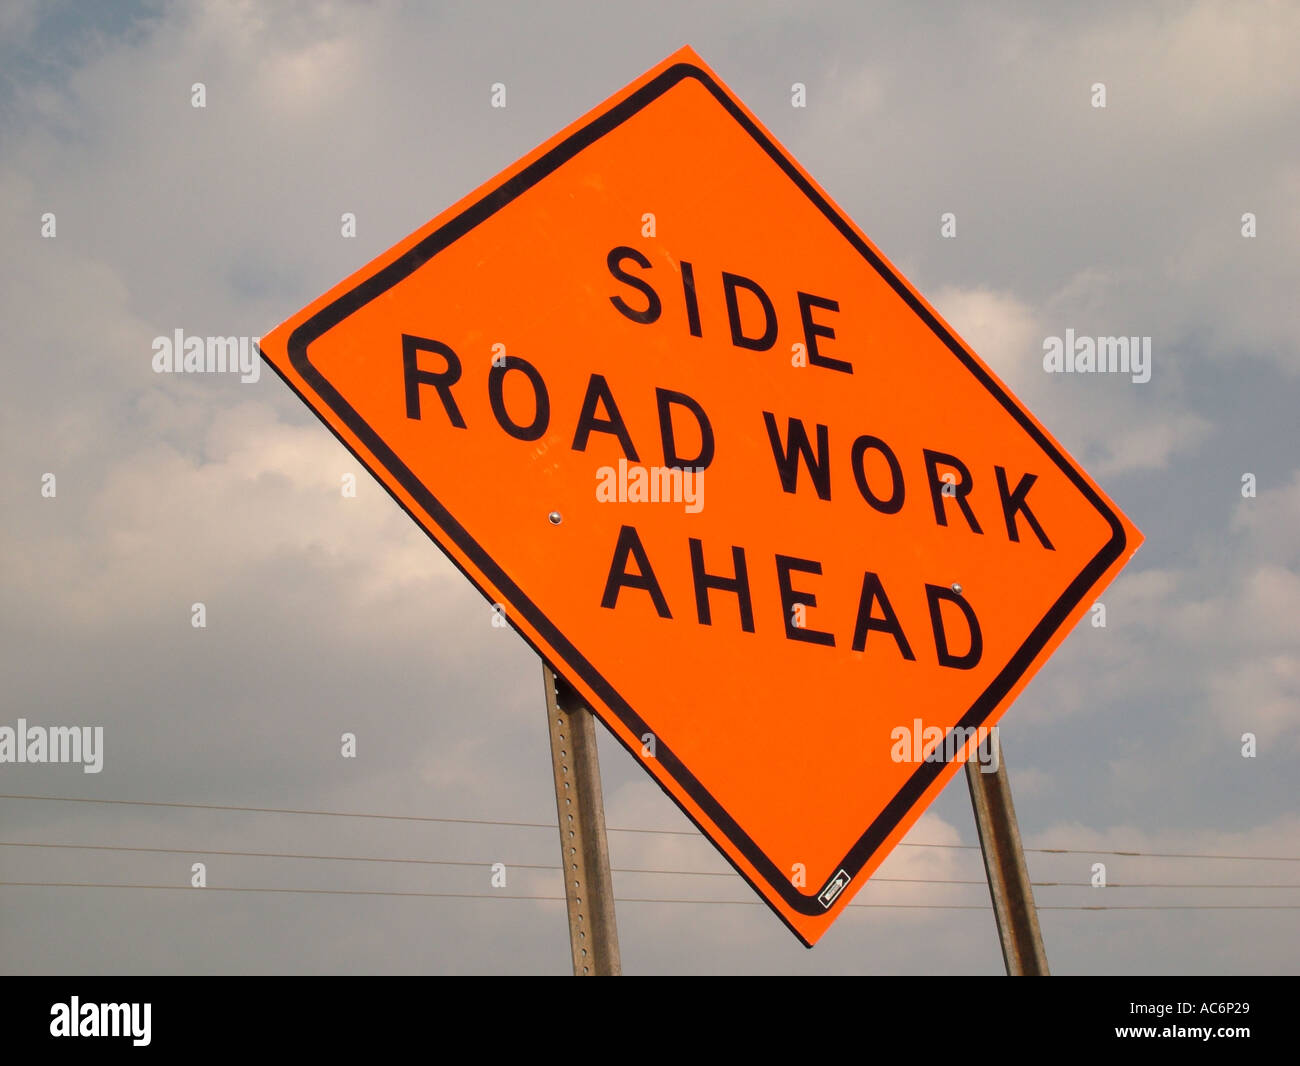 AJD42865, road sign, Side Road Work Ahead Stock Photo